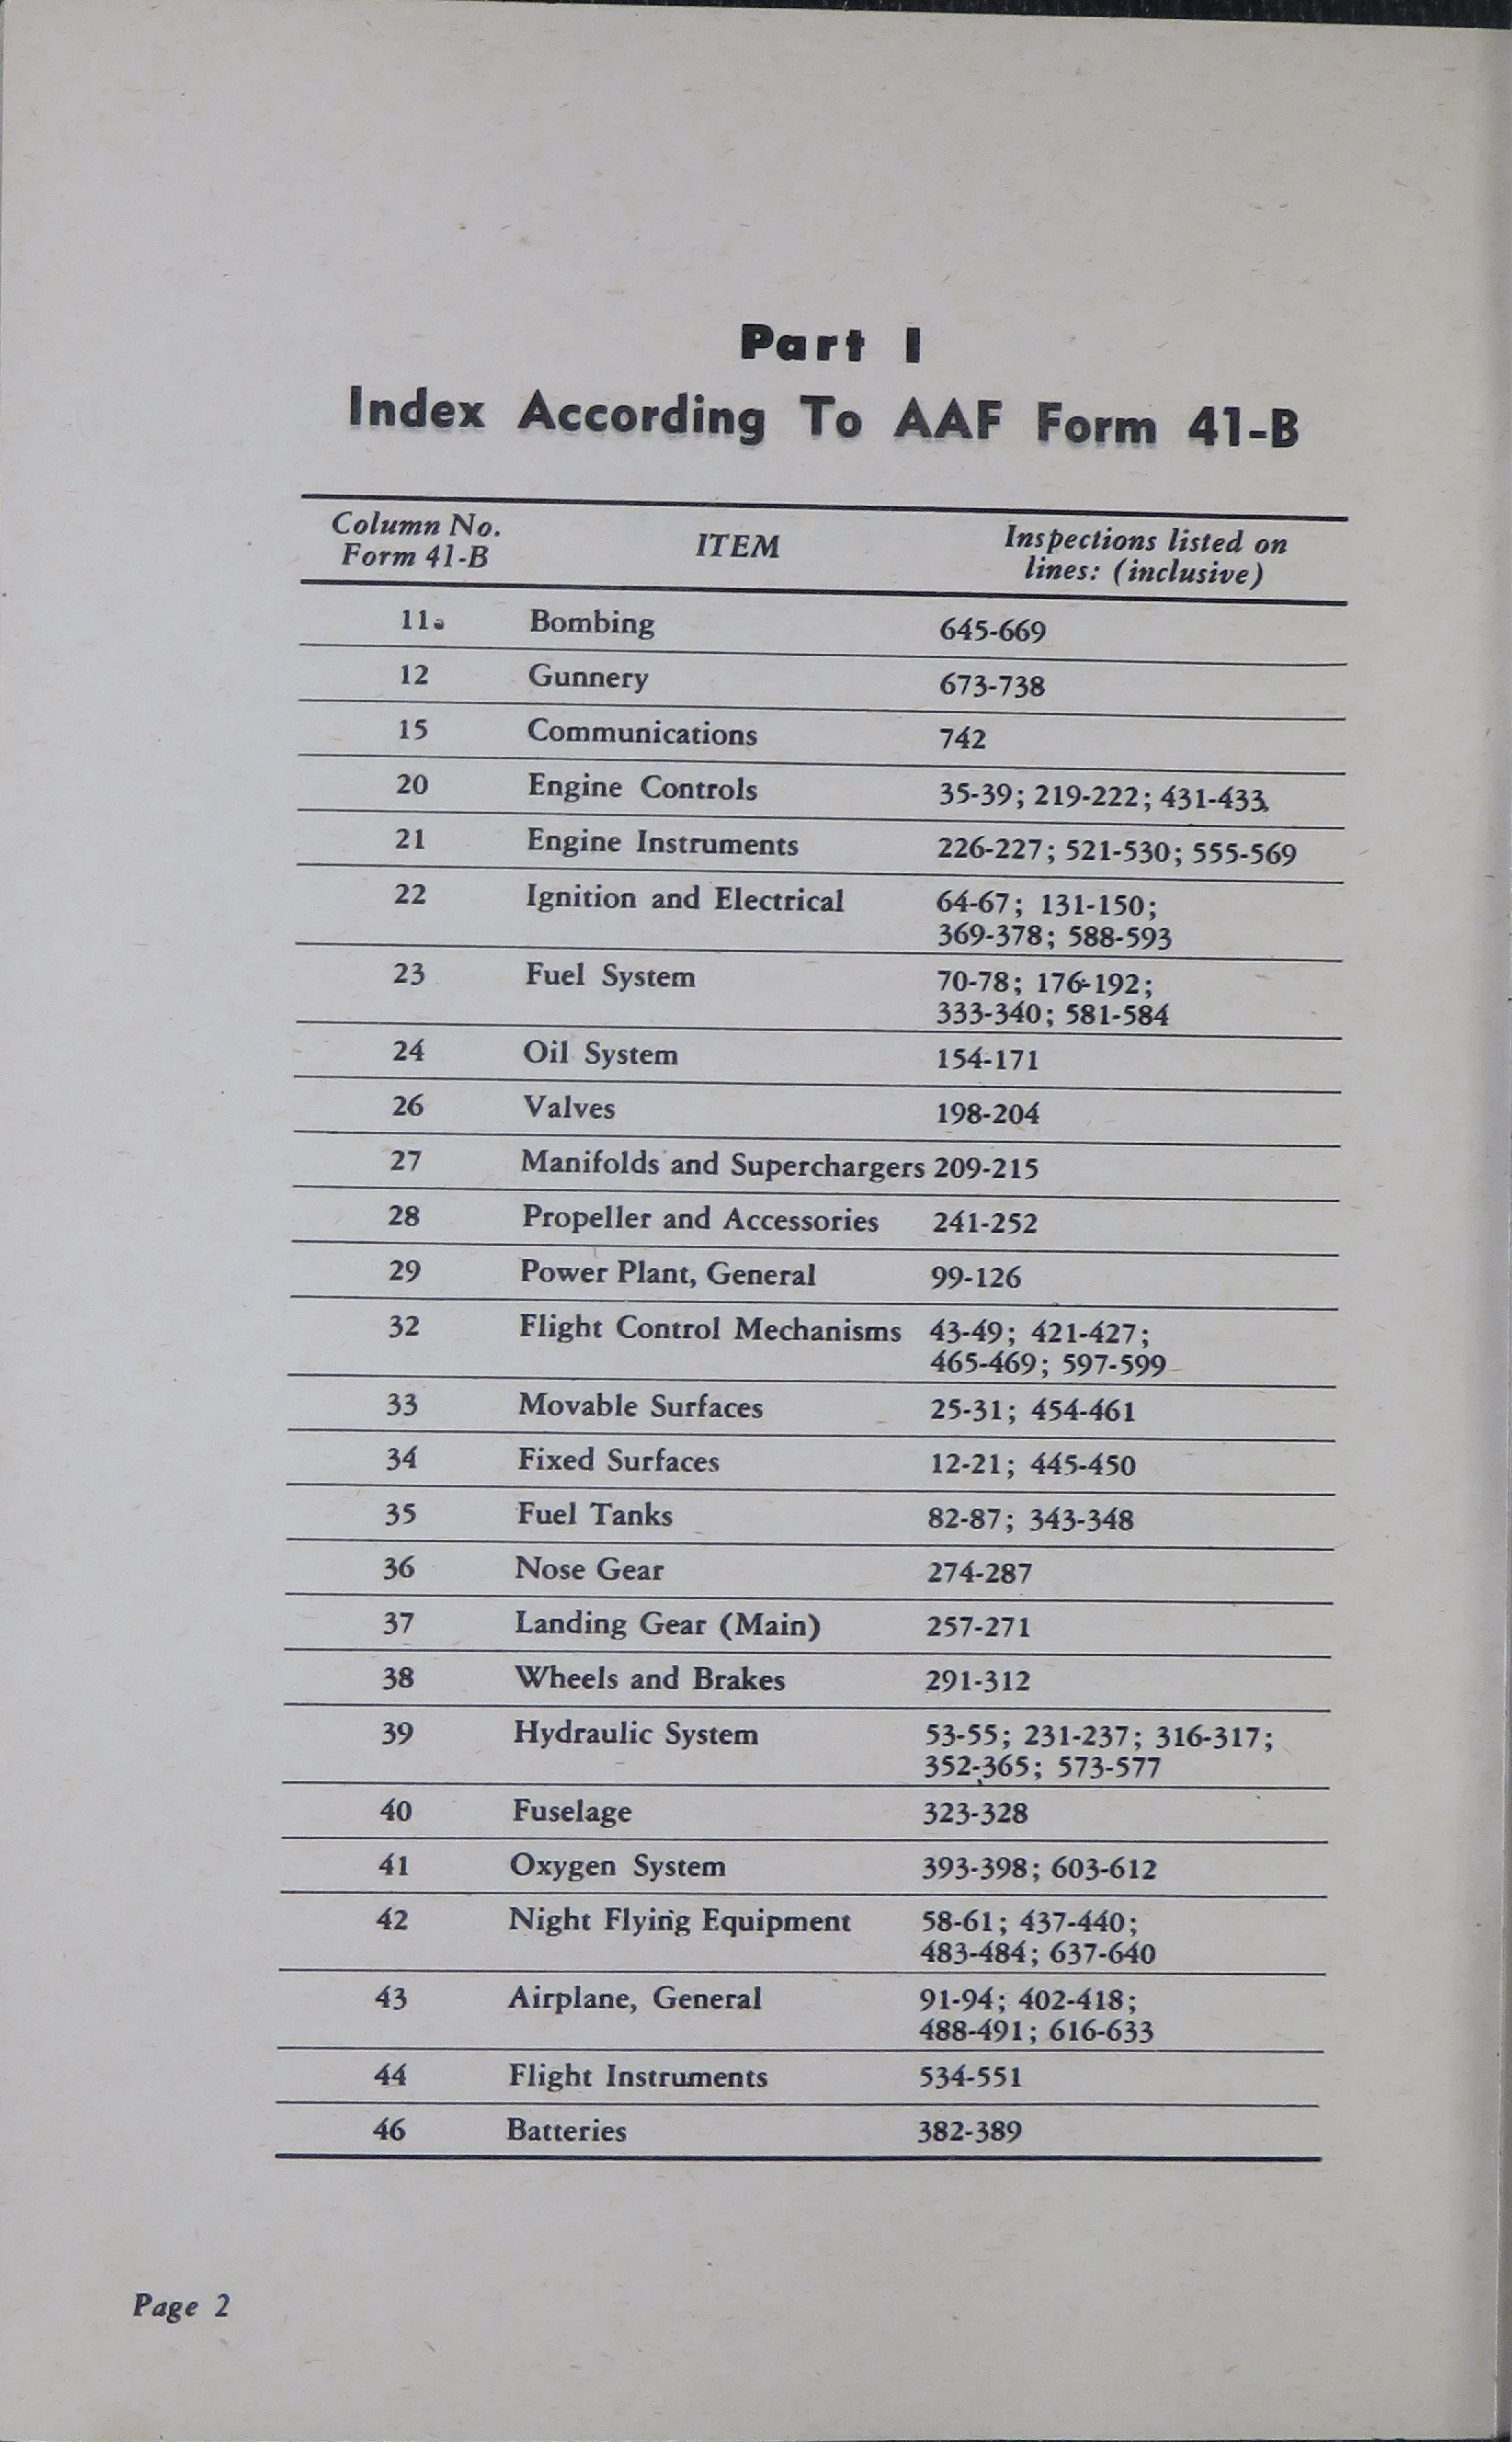 Sample page 6 from AirCorps Library document: Inspection and Maintenance Guide for A-20 Series Aircraft